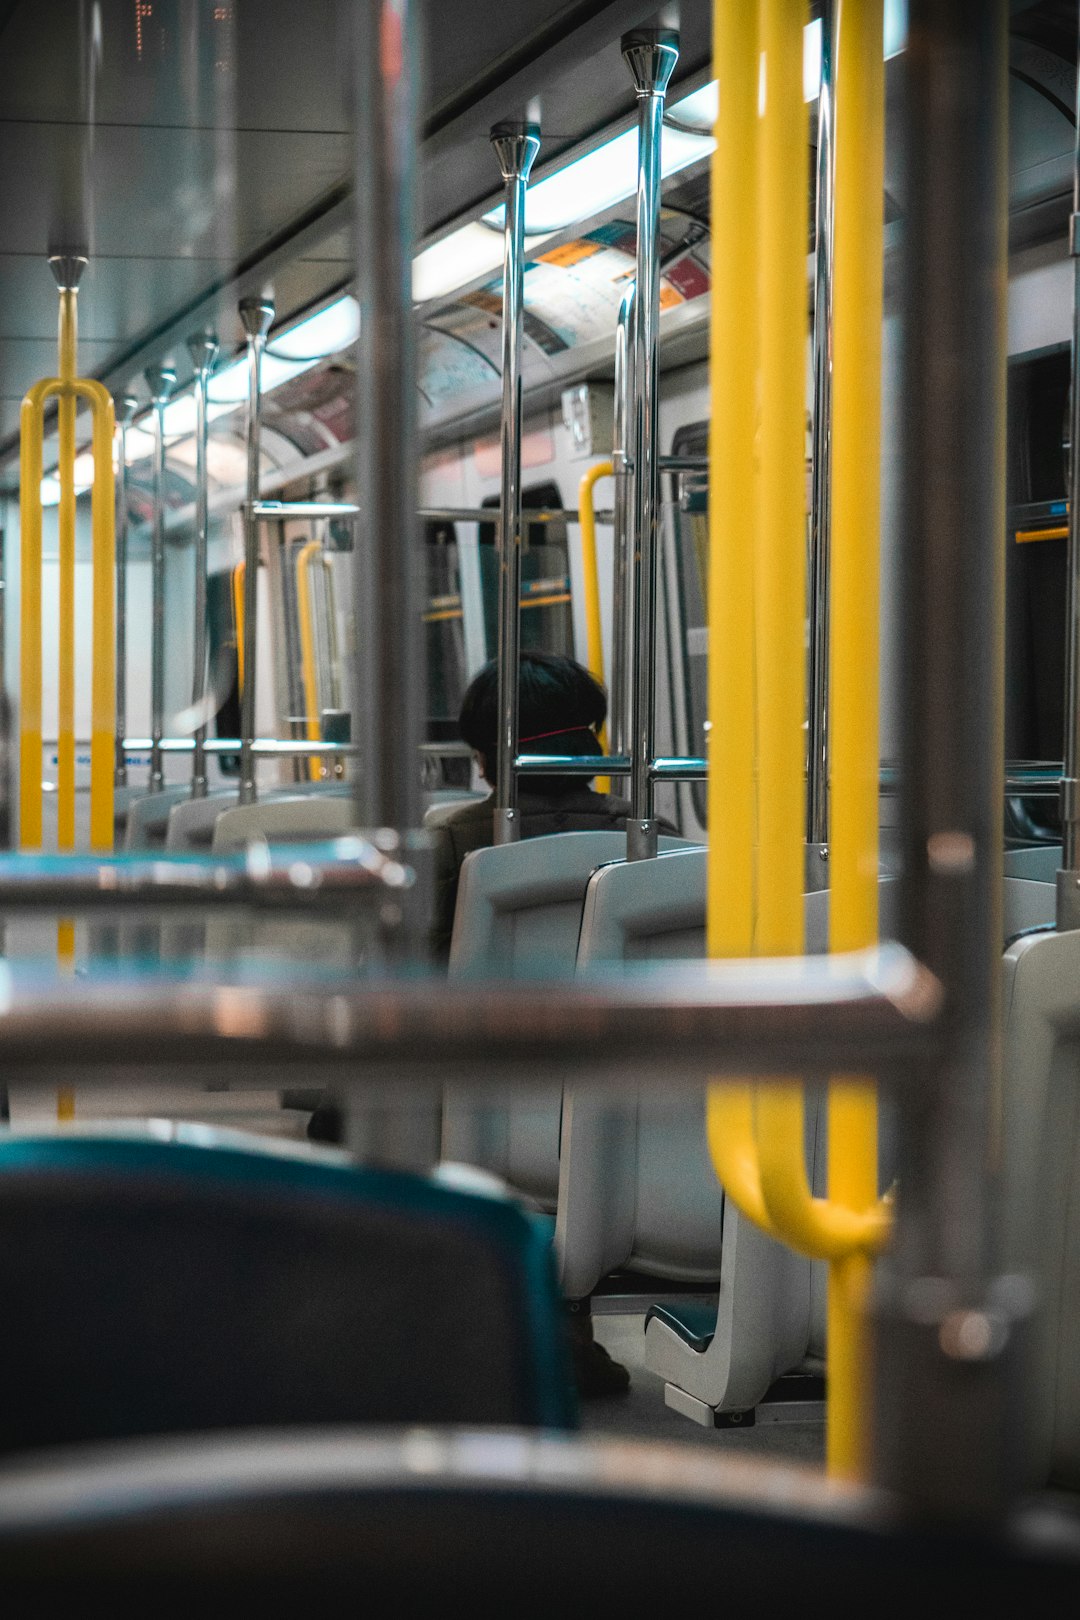 yellow and blue bus interior